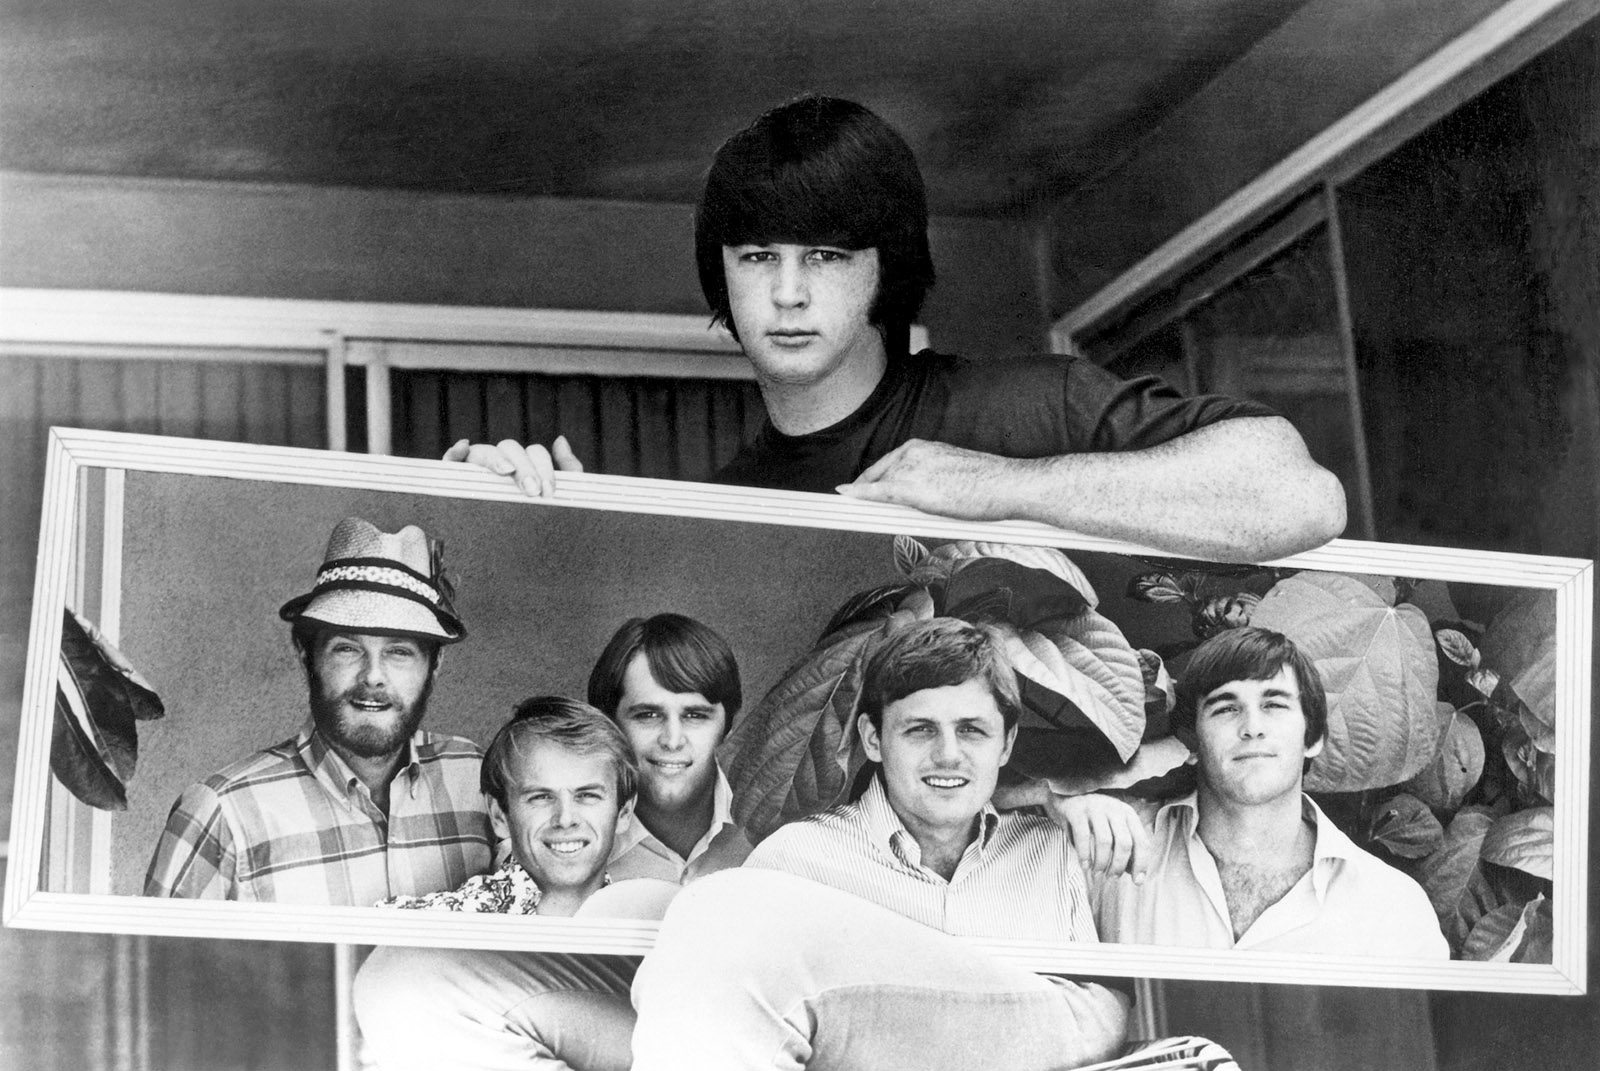 Brian Wilson holding a mirror reflecting the other members of the Beach Boys, 1966